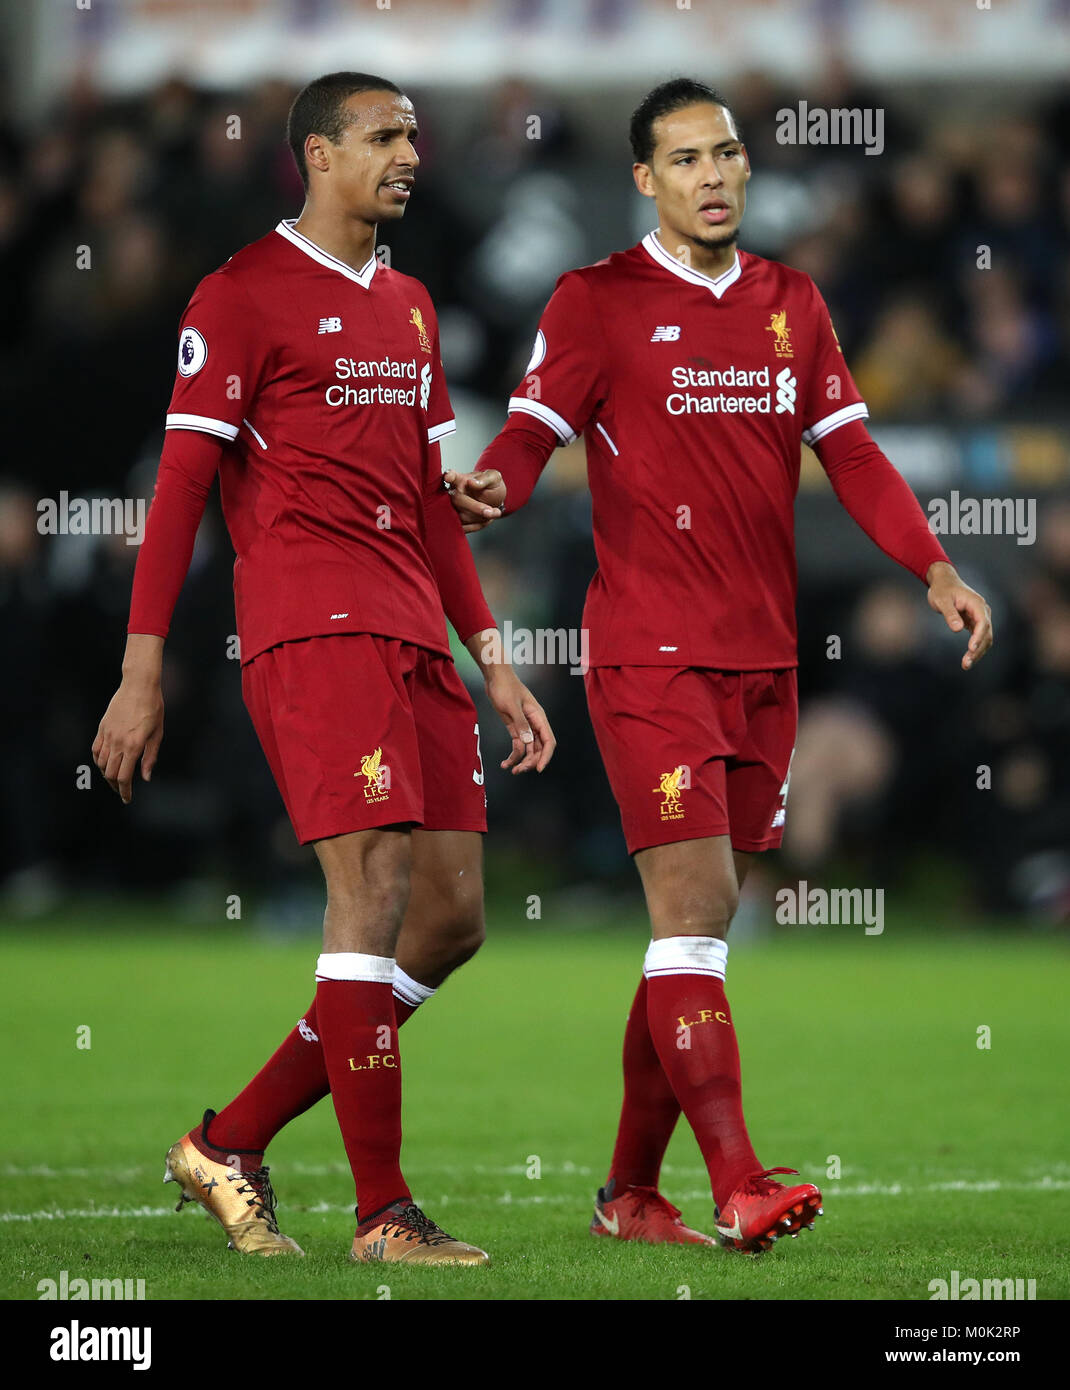 Liverpool's Joel Matip (left) and Virgil van Dijk during the Premier League match at the Liberty Stadium, Swansea. PRESS ASSOCIATION Photo. Picture date: Monday January 22, 2018. See PA story SOCCER Swansea. Photo credit should read: Nick Potts/PA Wire. RESTRICTIONS: EDITORIAL USE ONLY No use with unauthorised audio, video, data, fixture lists, club/league logos or 'live' services. Online in-match use limited to 75 images, no video emulation. No use in betting, games or single club/league/player publications. Stock Photo